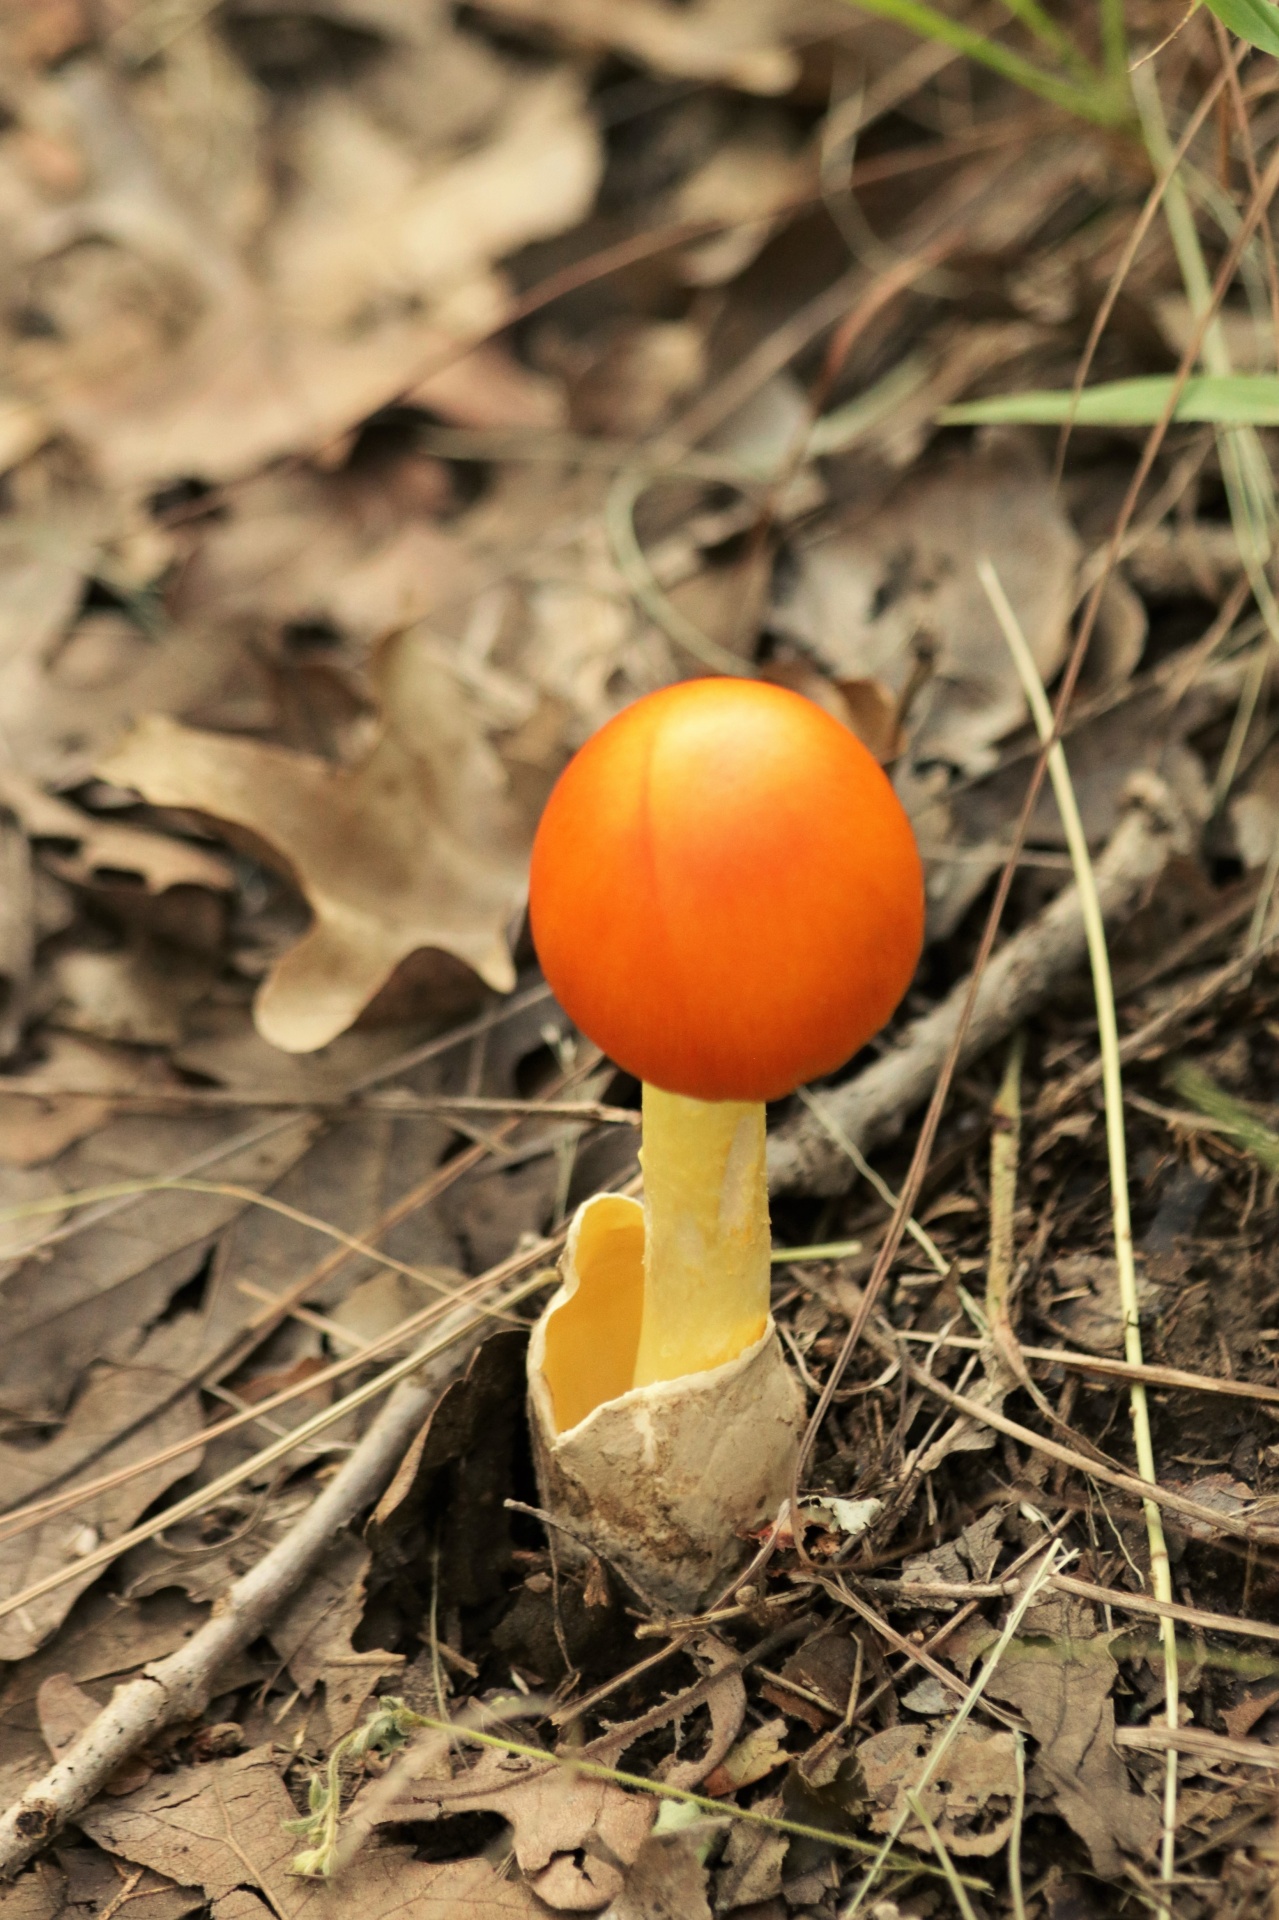 A bright orange amanita jacksonii mushroom is emerging from its white volva among dead leaves and sticks in early spring.